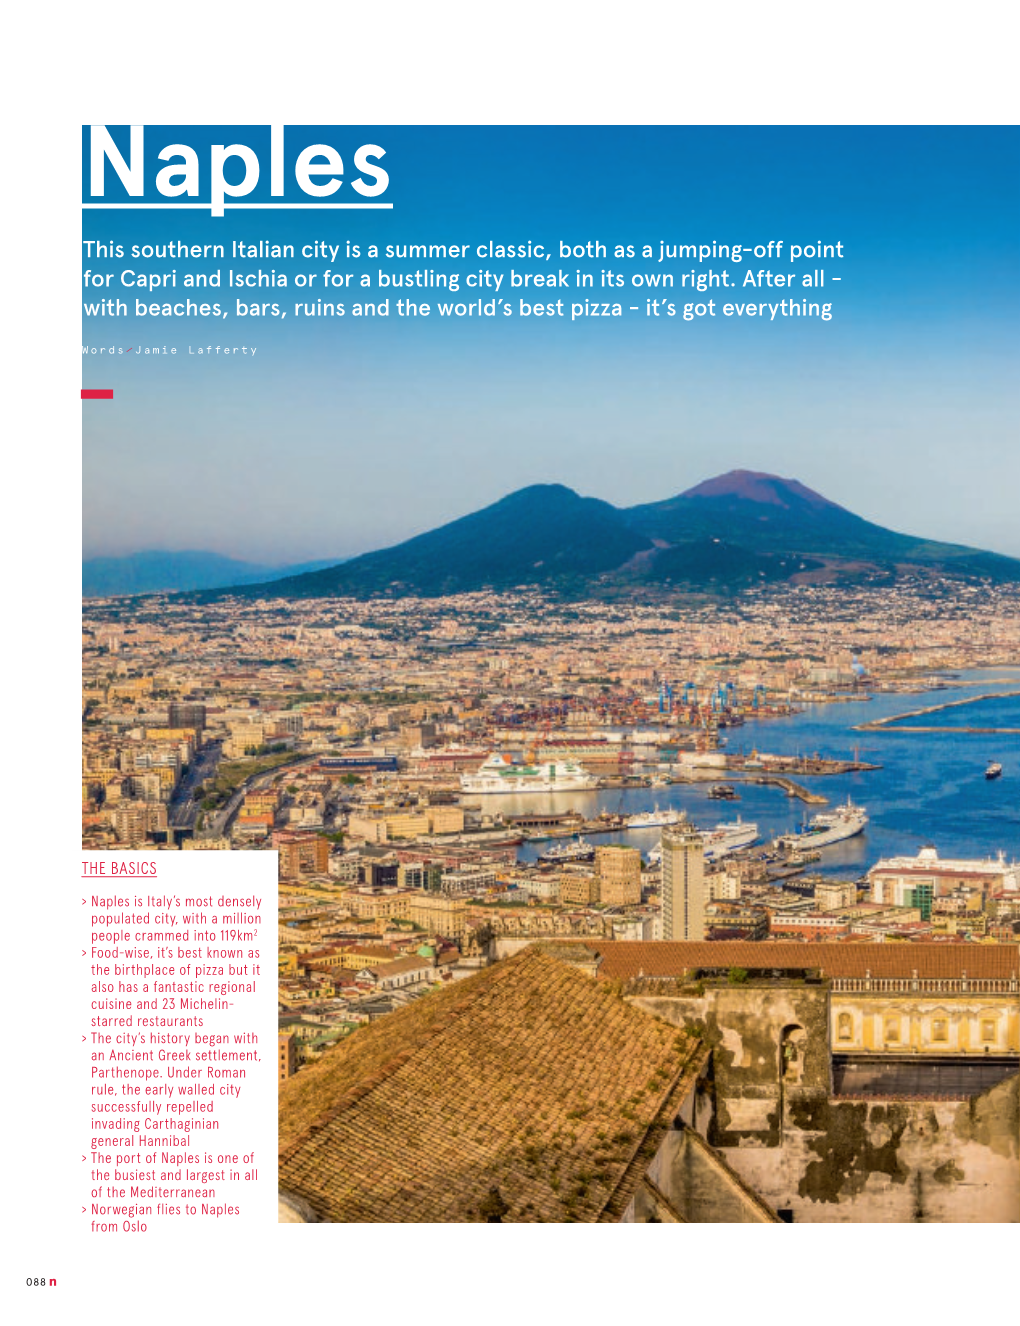 Naples This Southern Italian City Is a Summer Classic, Both As a Jumping-Off Point for Capri and Ischia Or for a Bustling City Break in Its Own Right